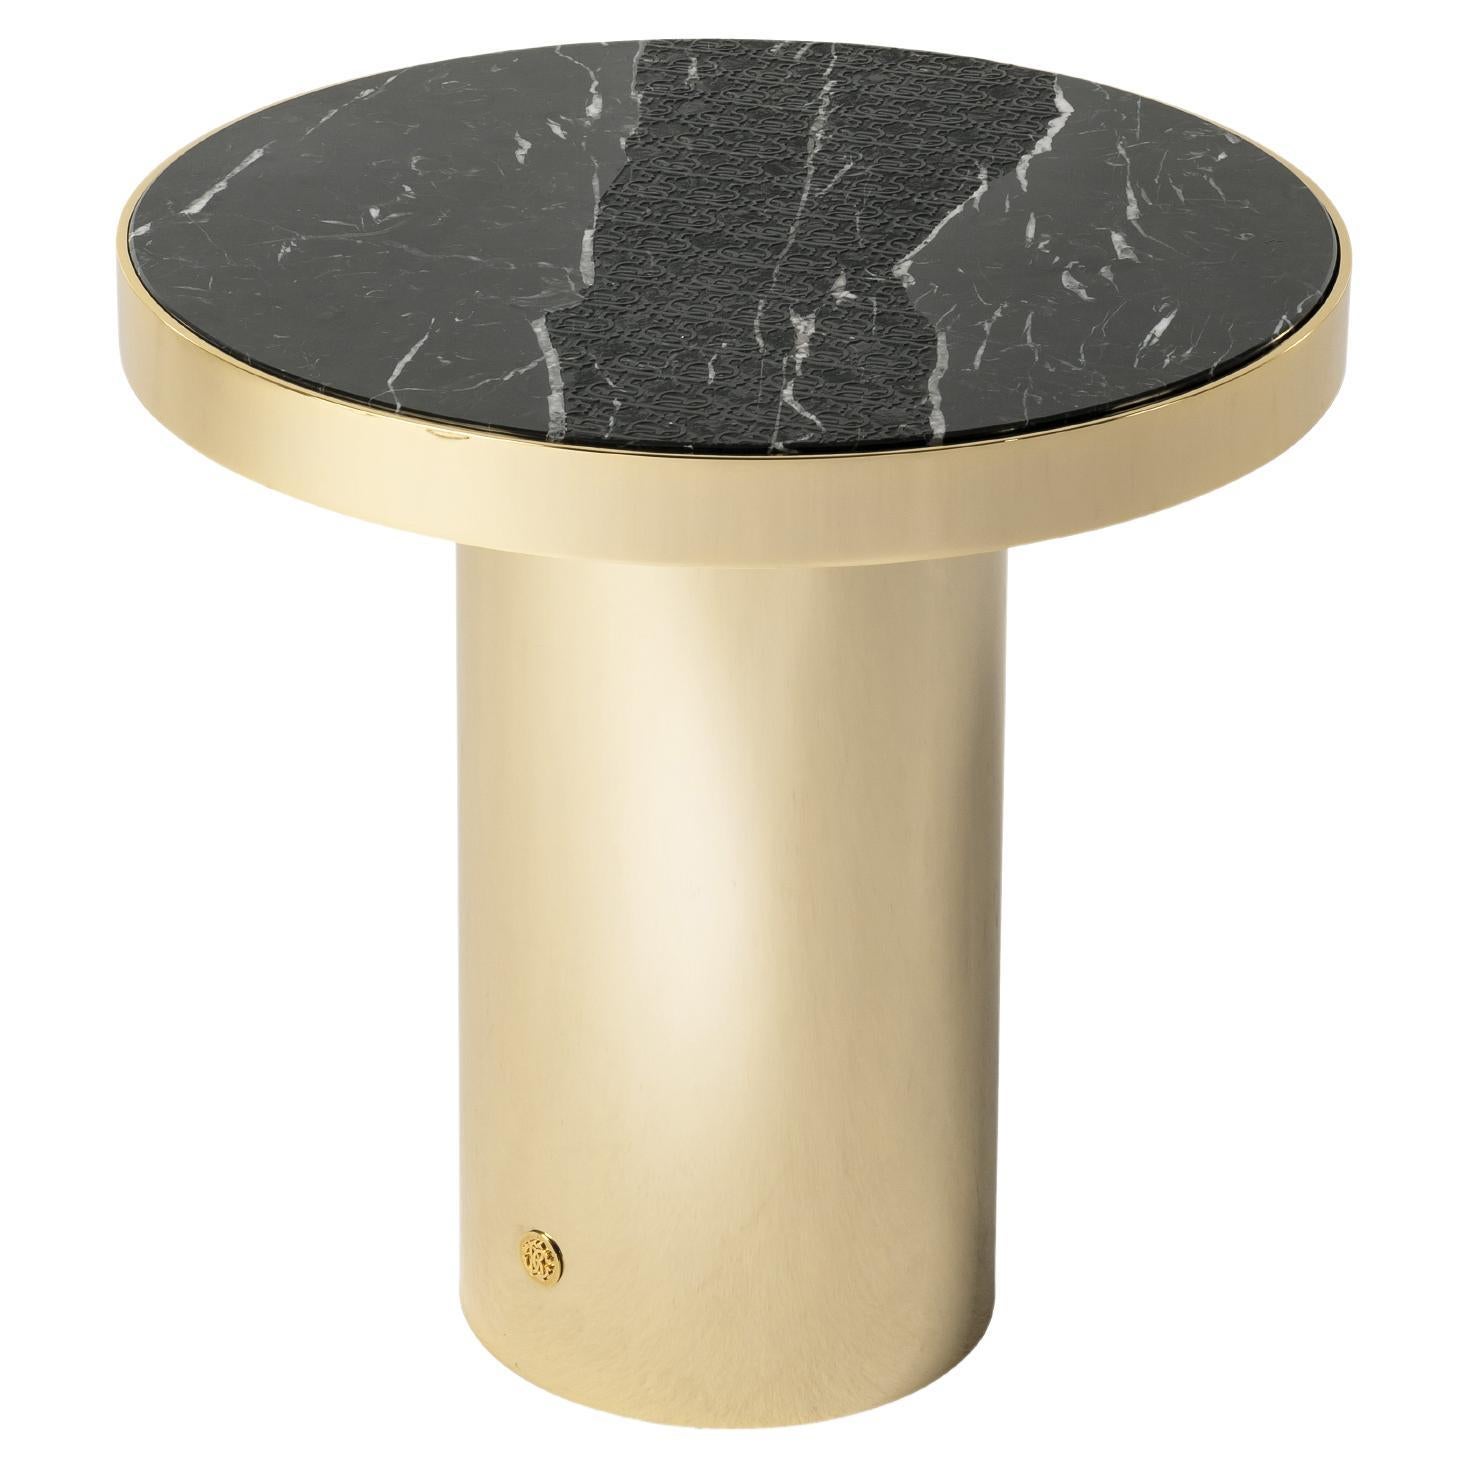 21st Century Sahara Side Table with Marble Top by Roberto Cavalli Home Interiors